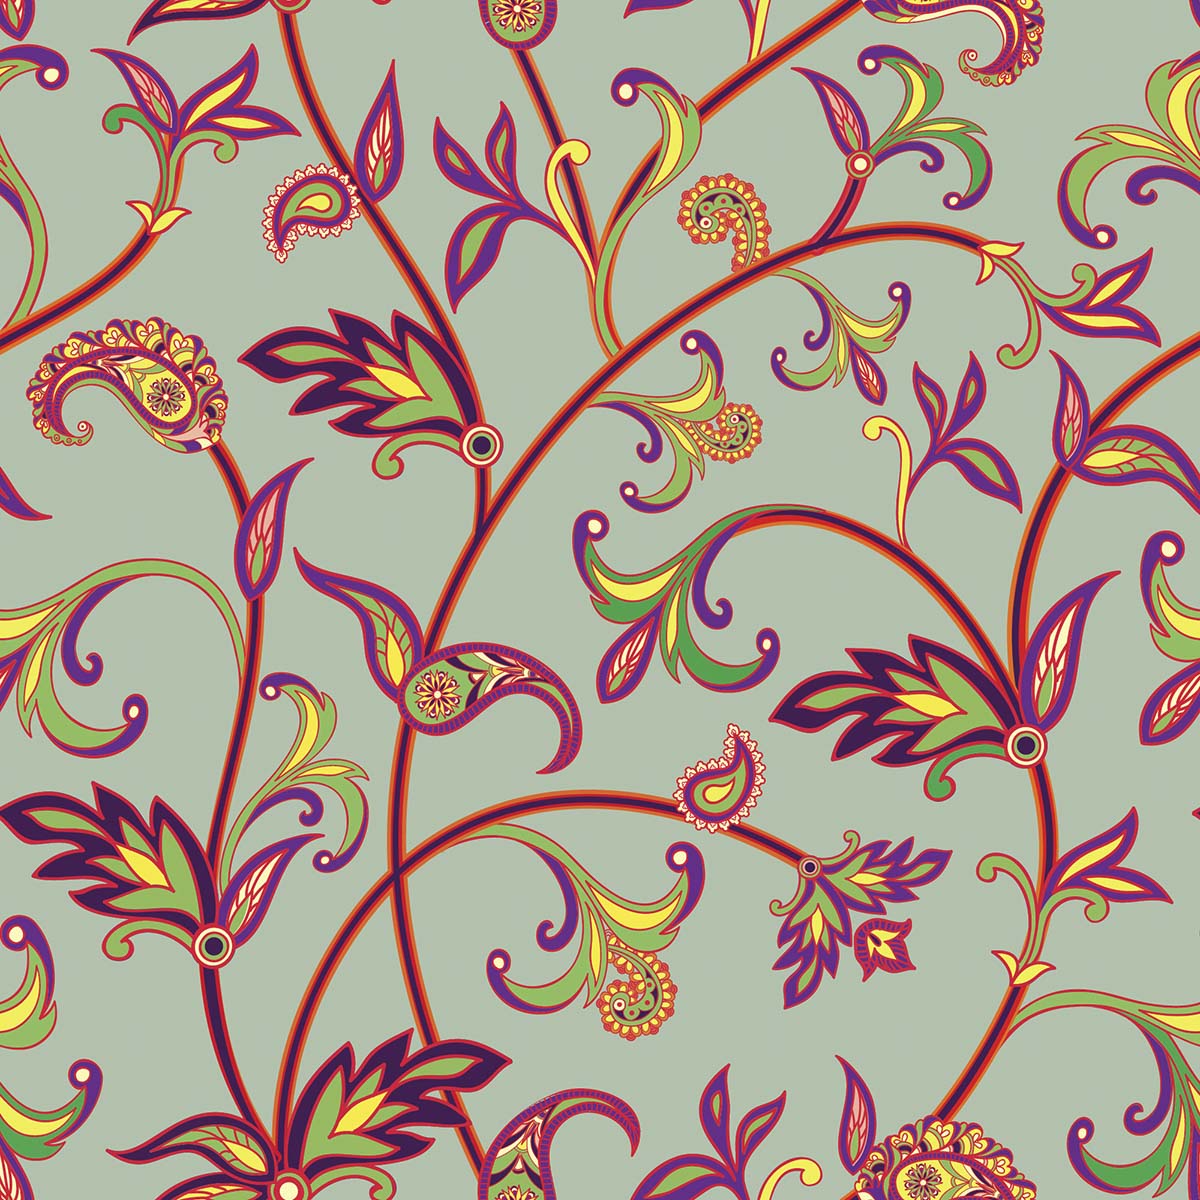 A colorful floral pattern on a grey background